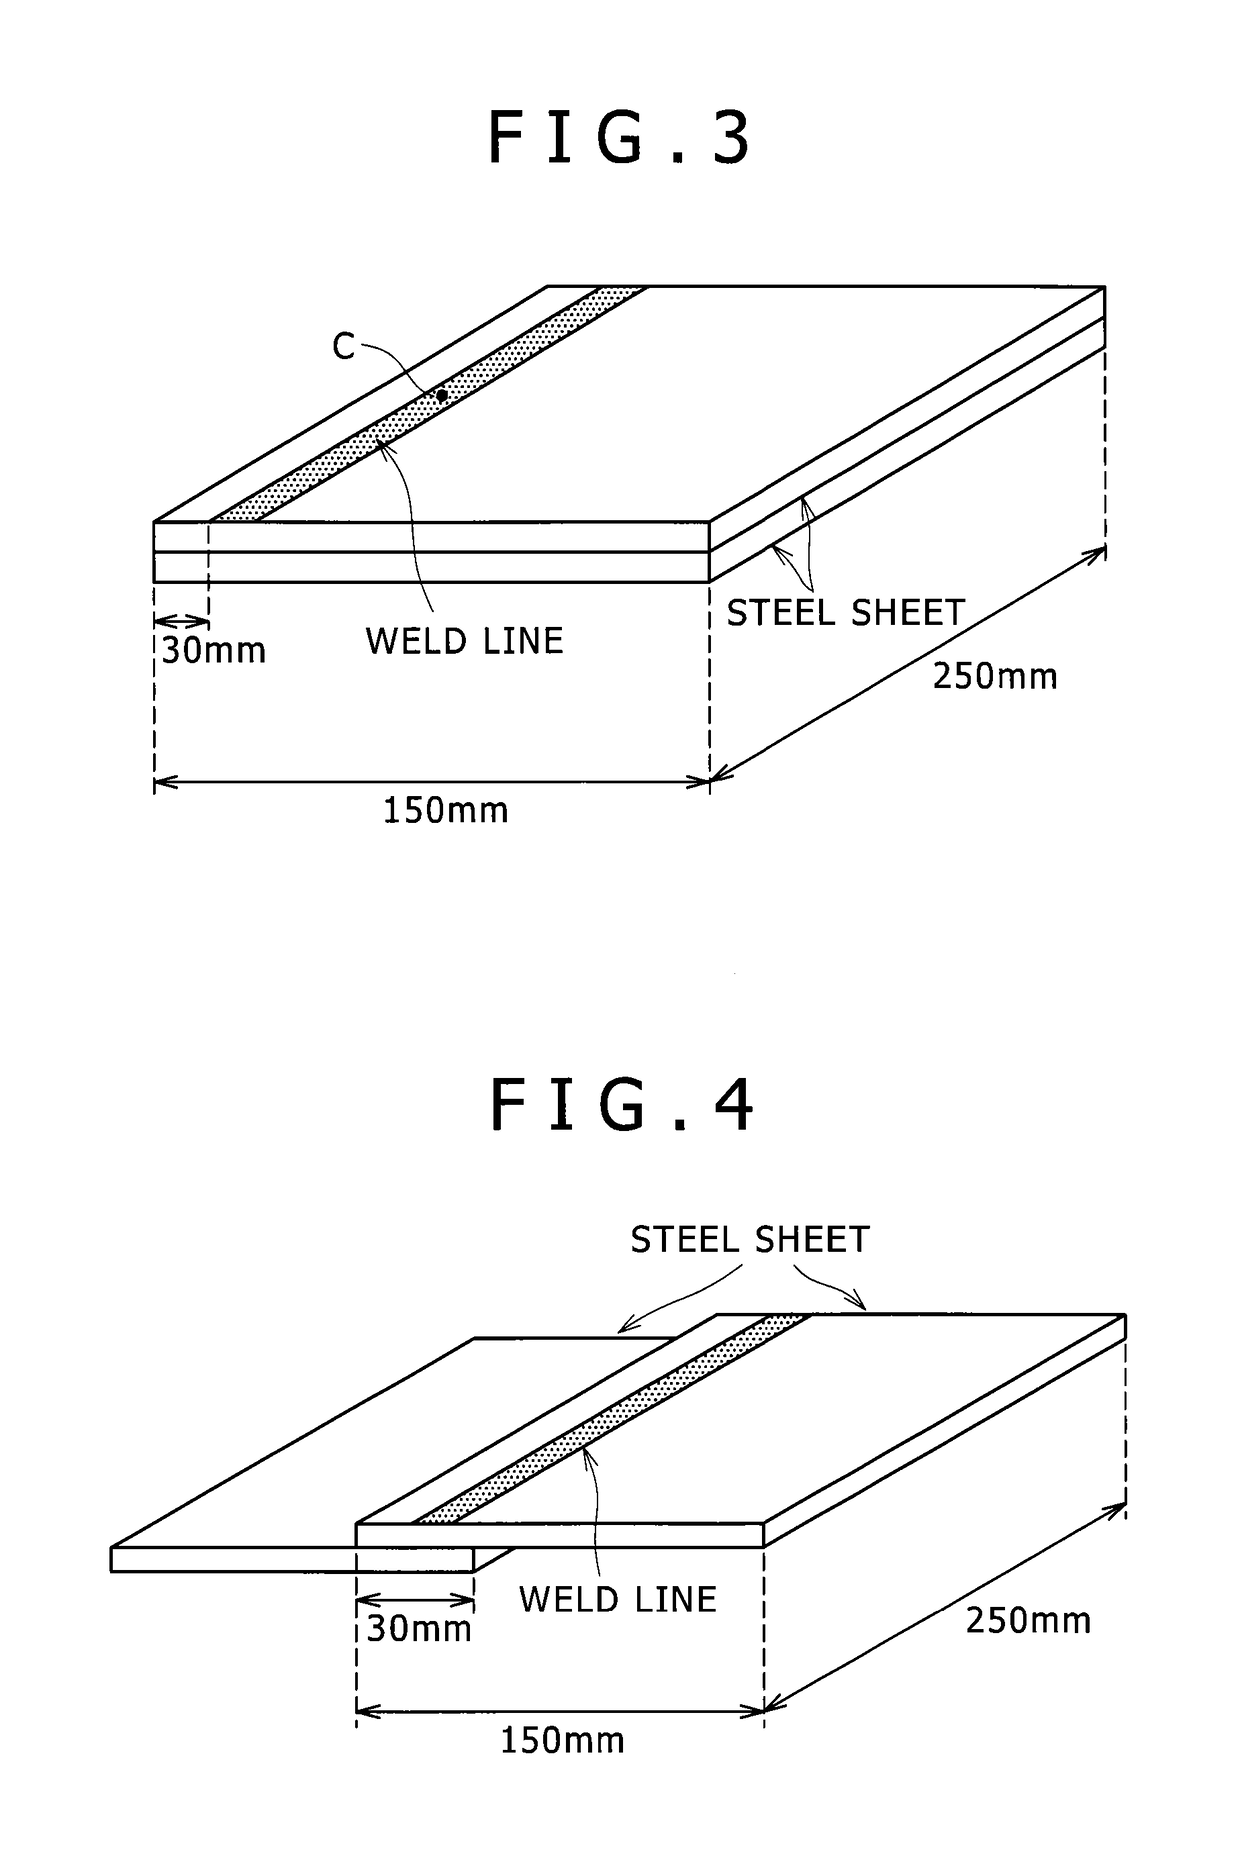 High-strength steel sheet excellent in seam weldability